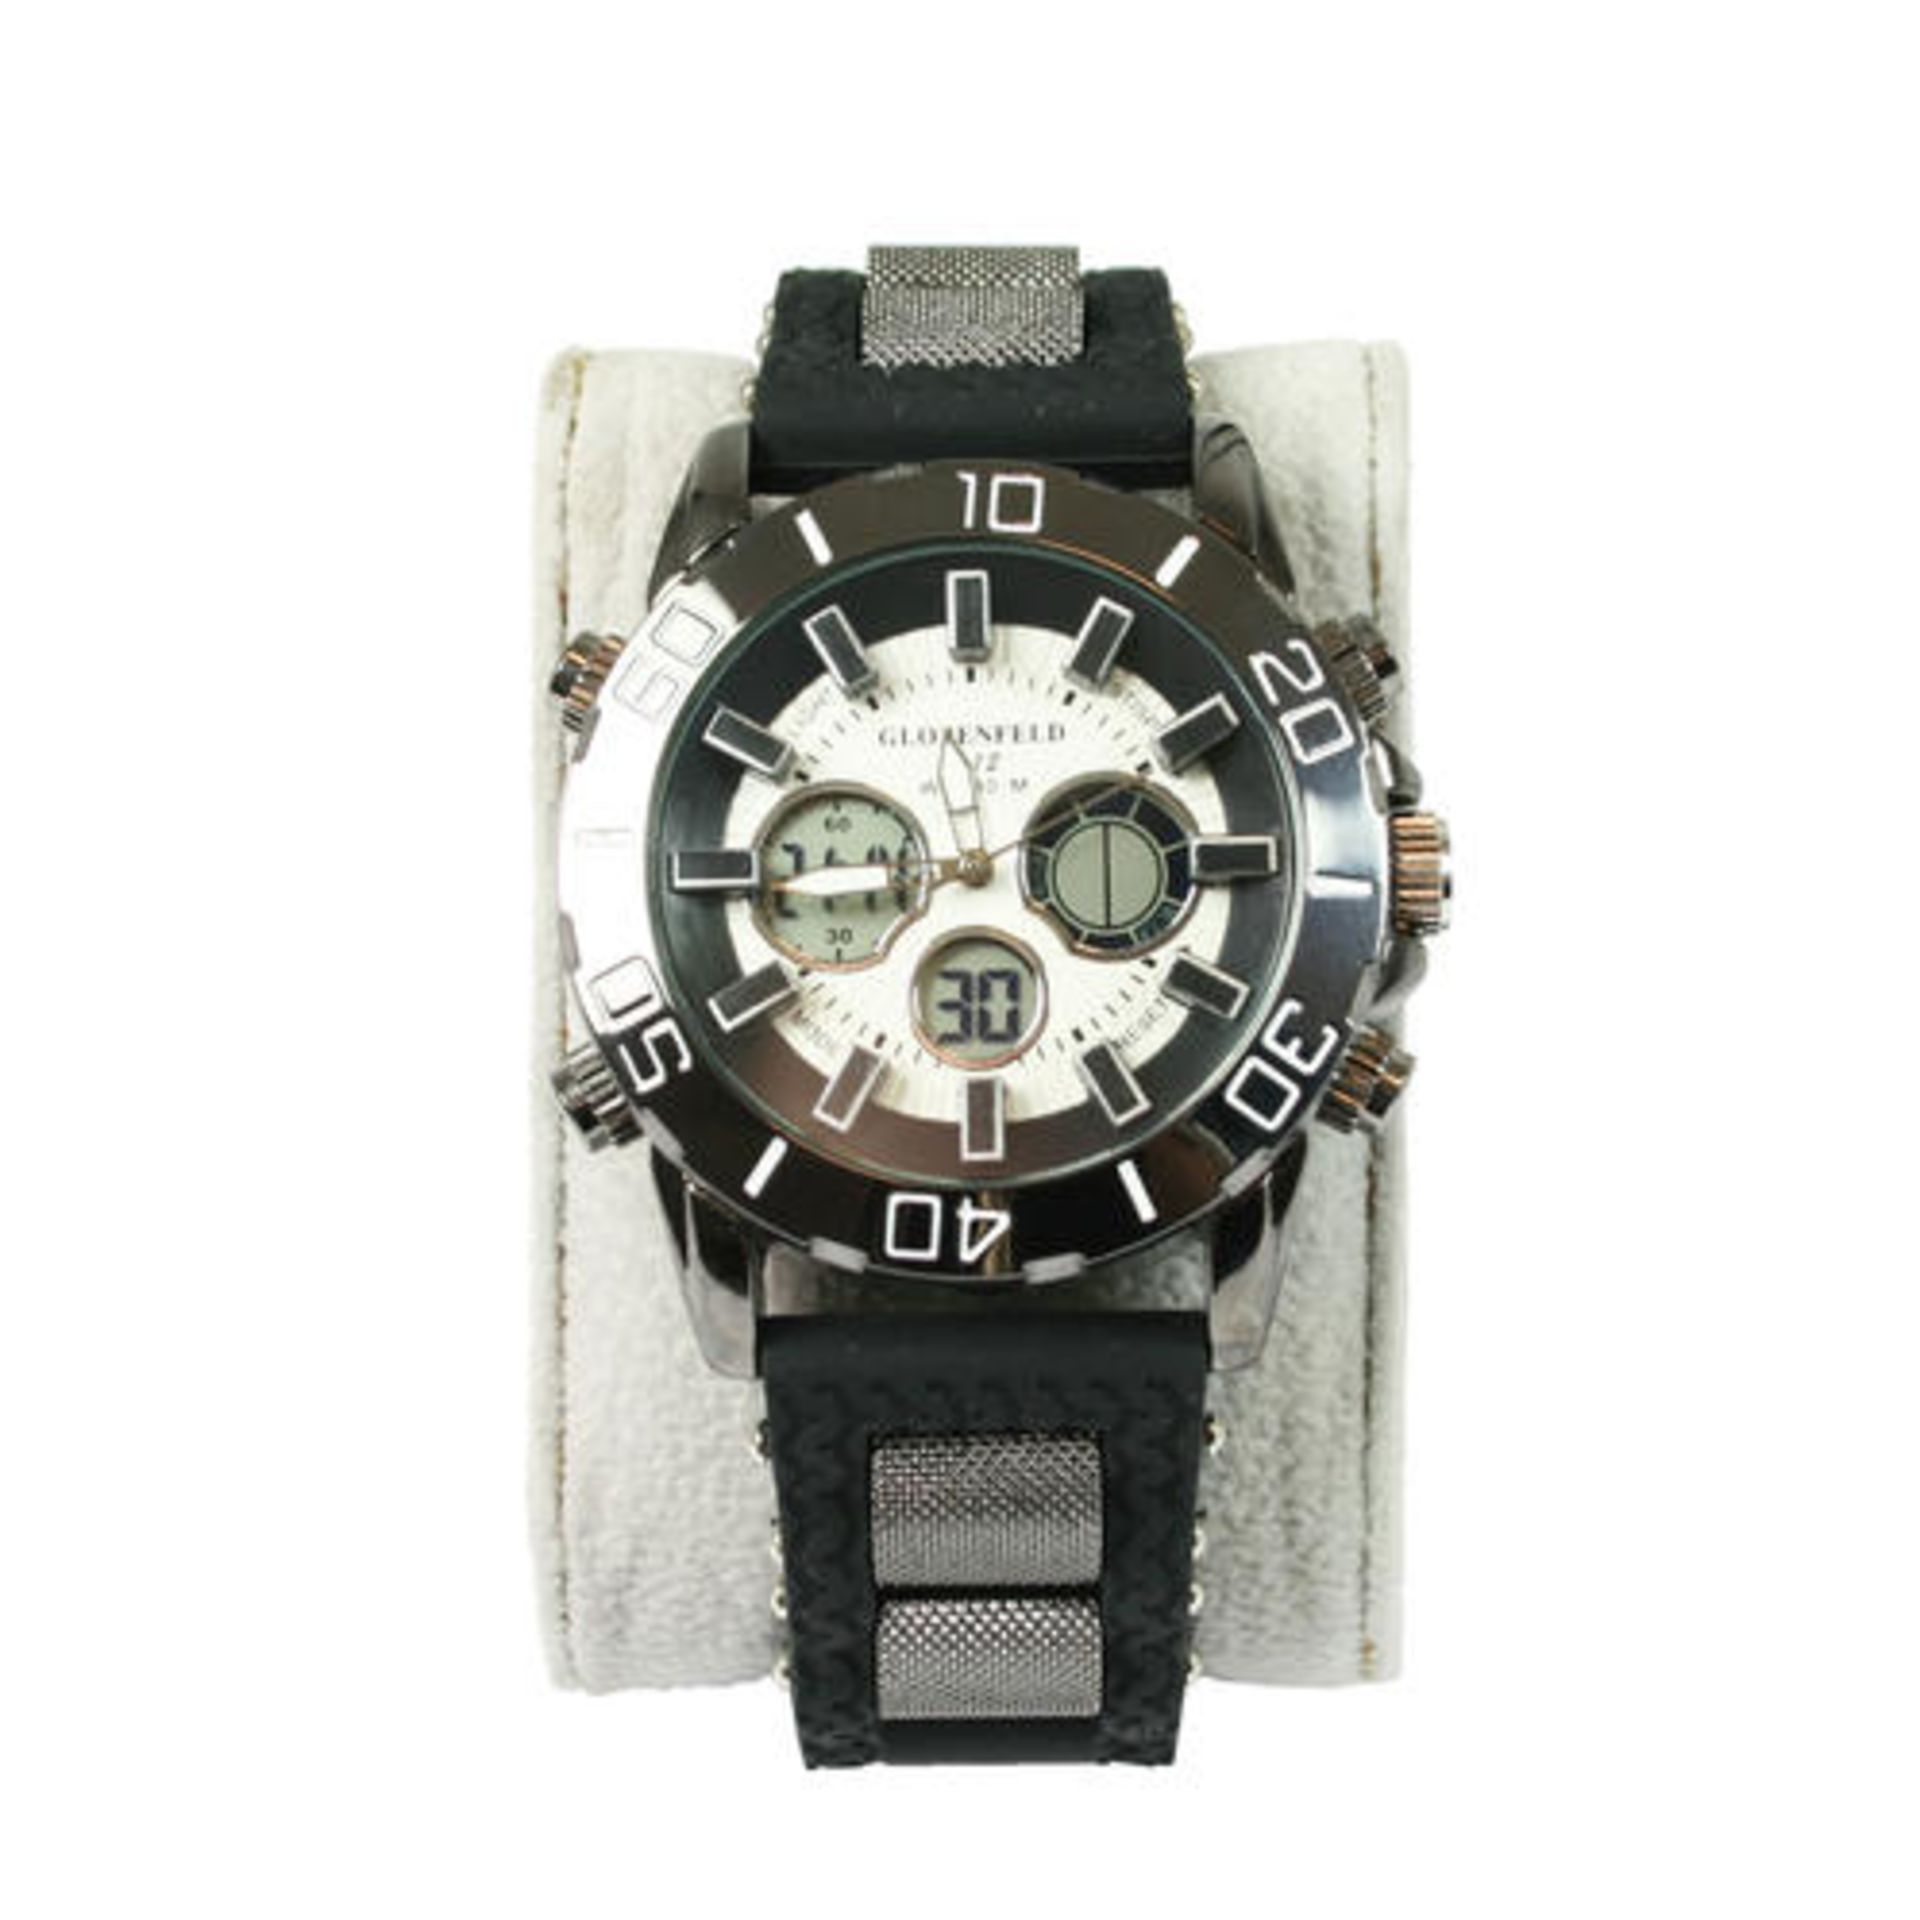 V Brand New Gents Globenfeld V.12 Limited Edition Watch RRP £425 With Box - Warranty - Papers Etc (